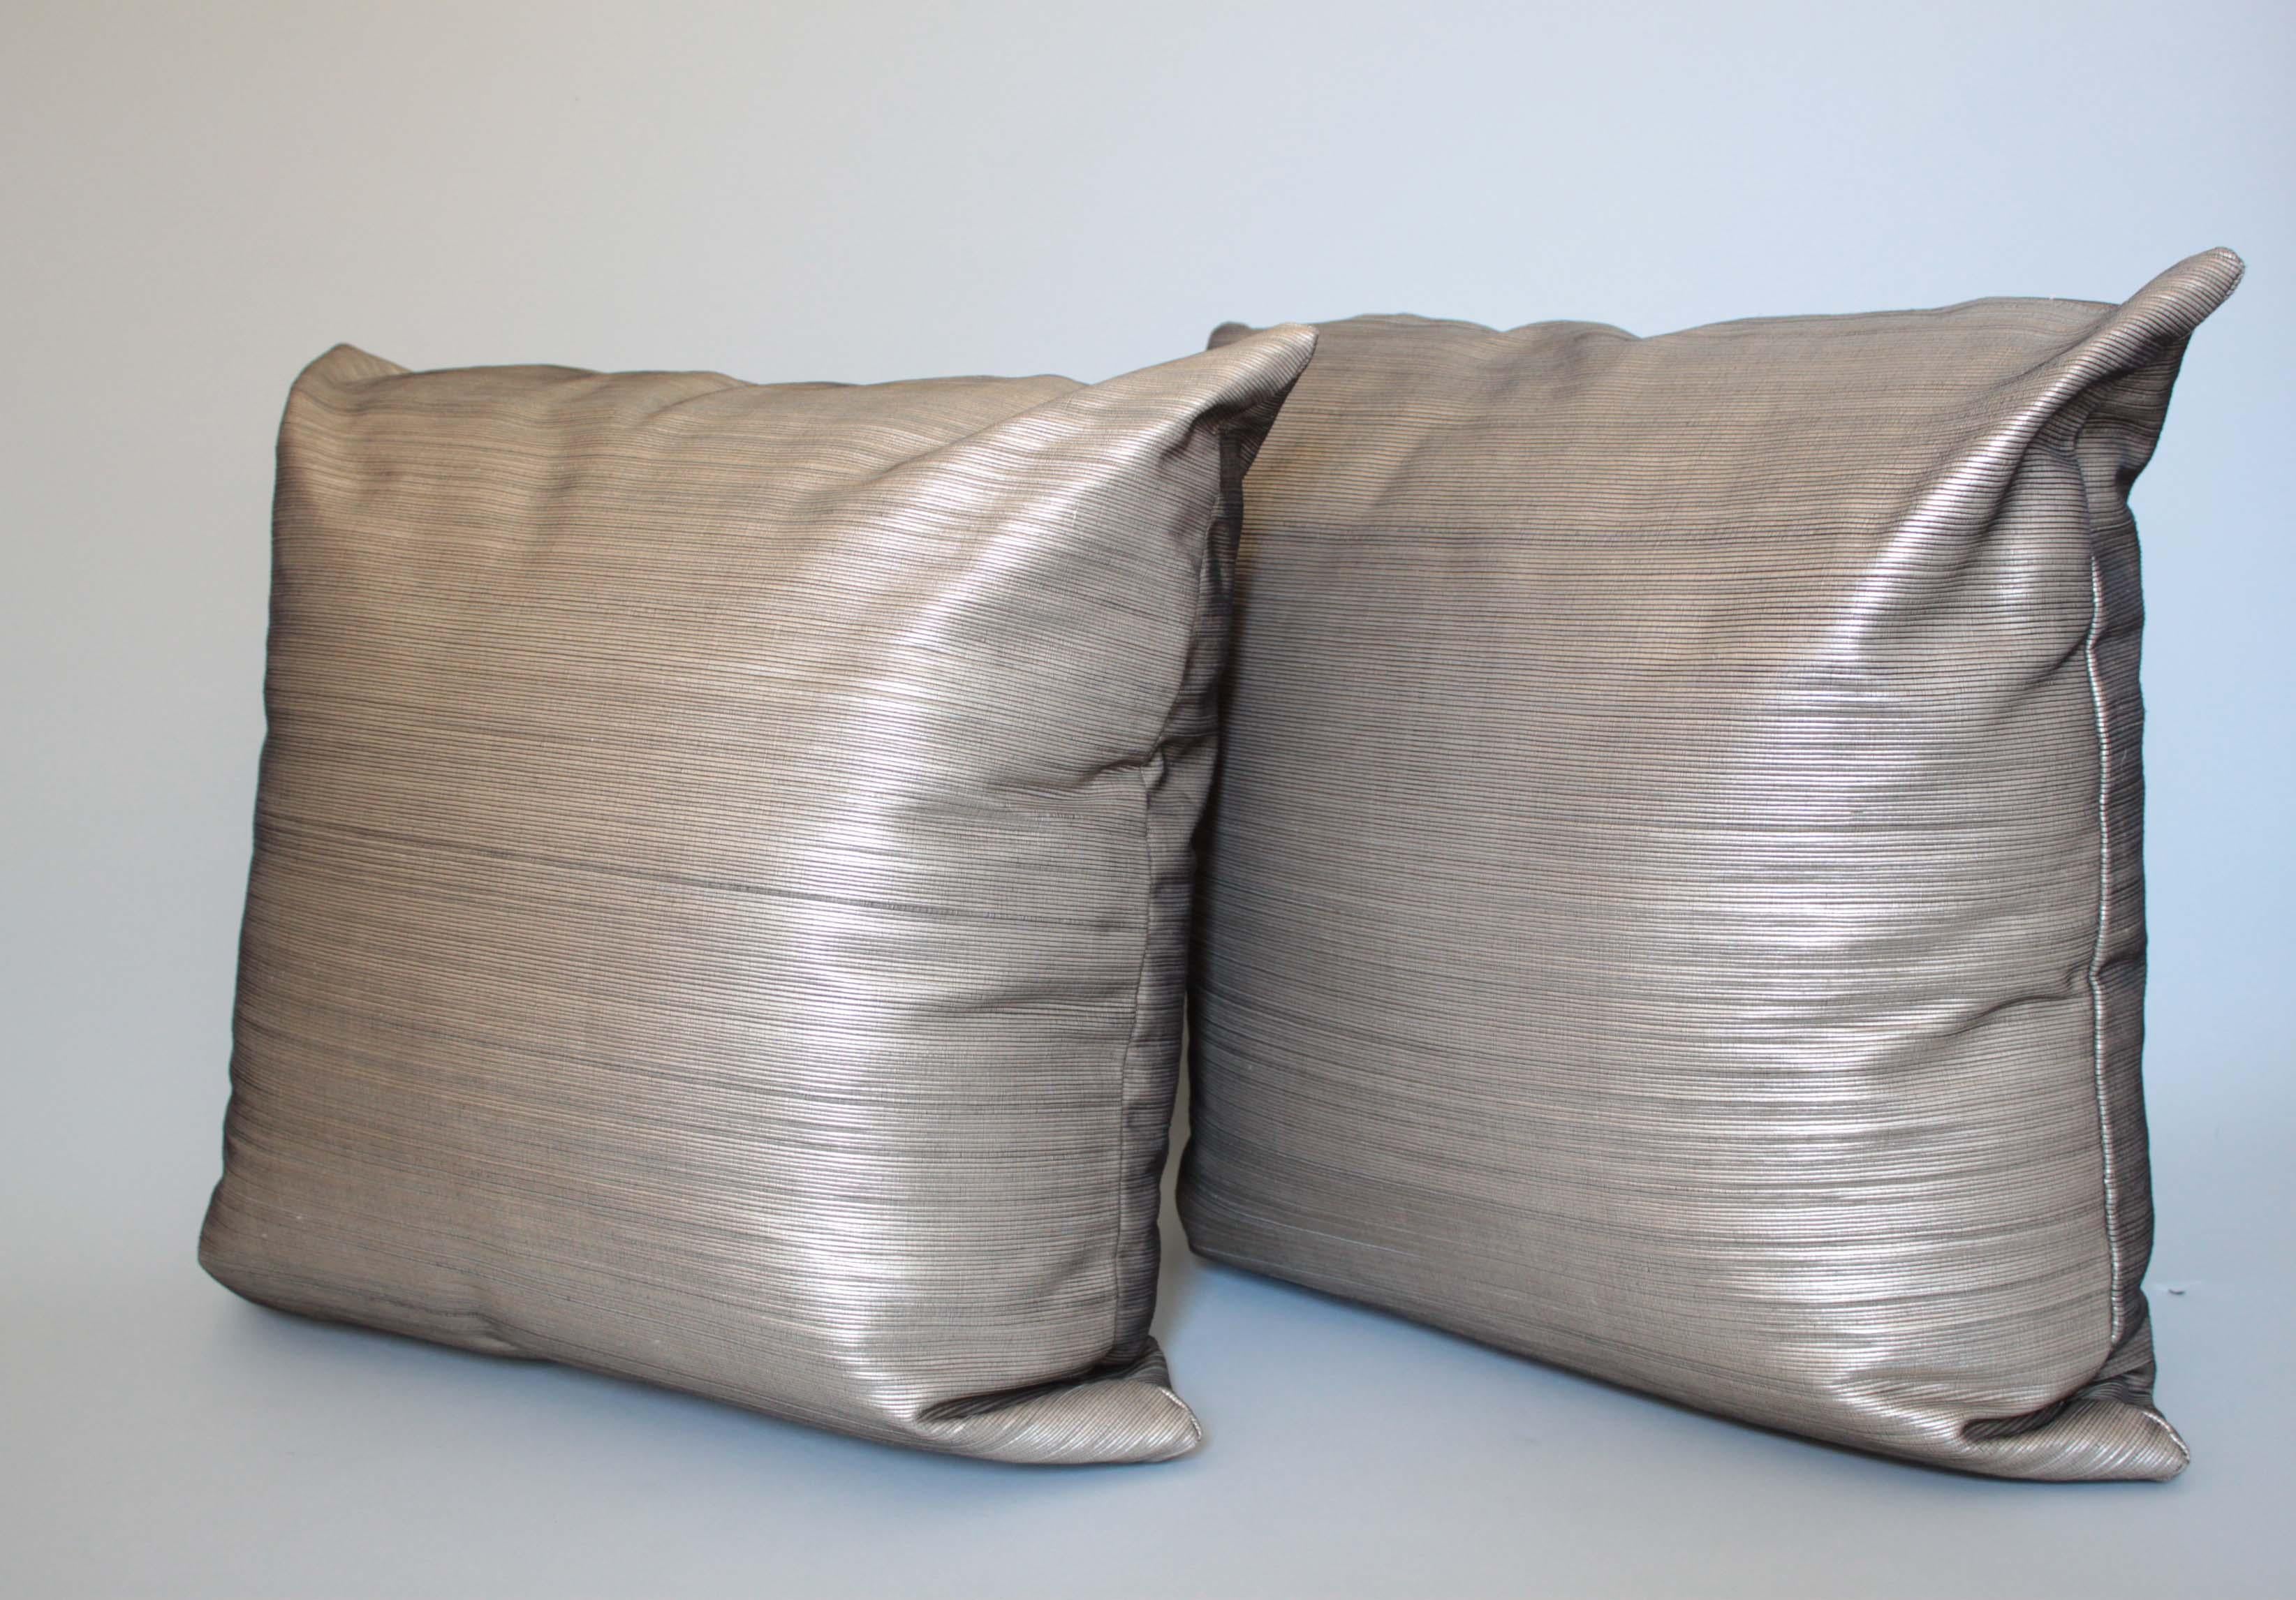 Silk & platinum metallic leather pillows with down-free inserts. 
They are wonderfully constructed in the Philippines by talented textile weavers. 
Pillows by Stationhaus.